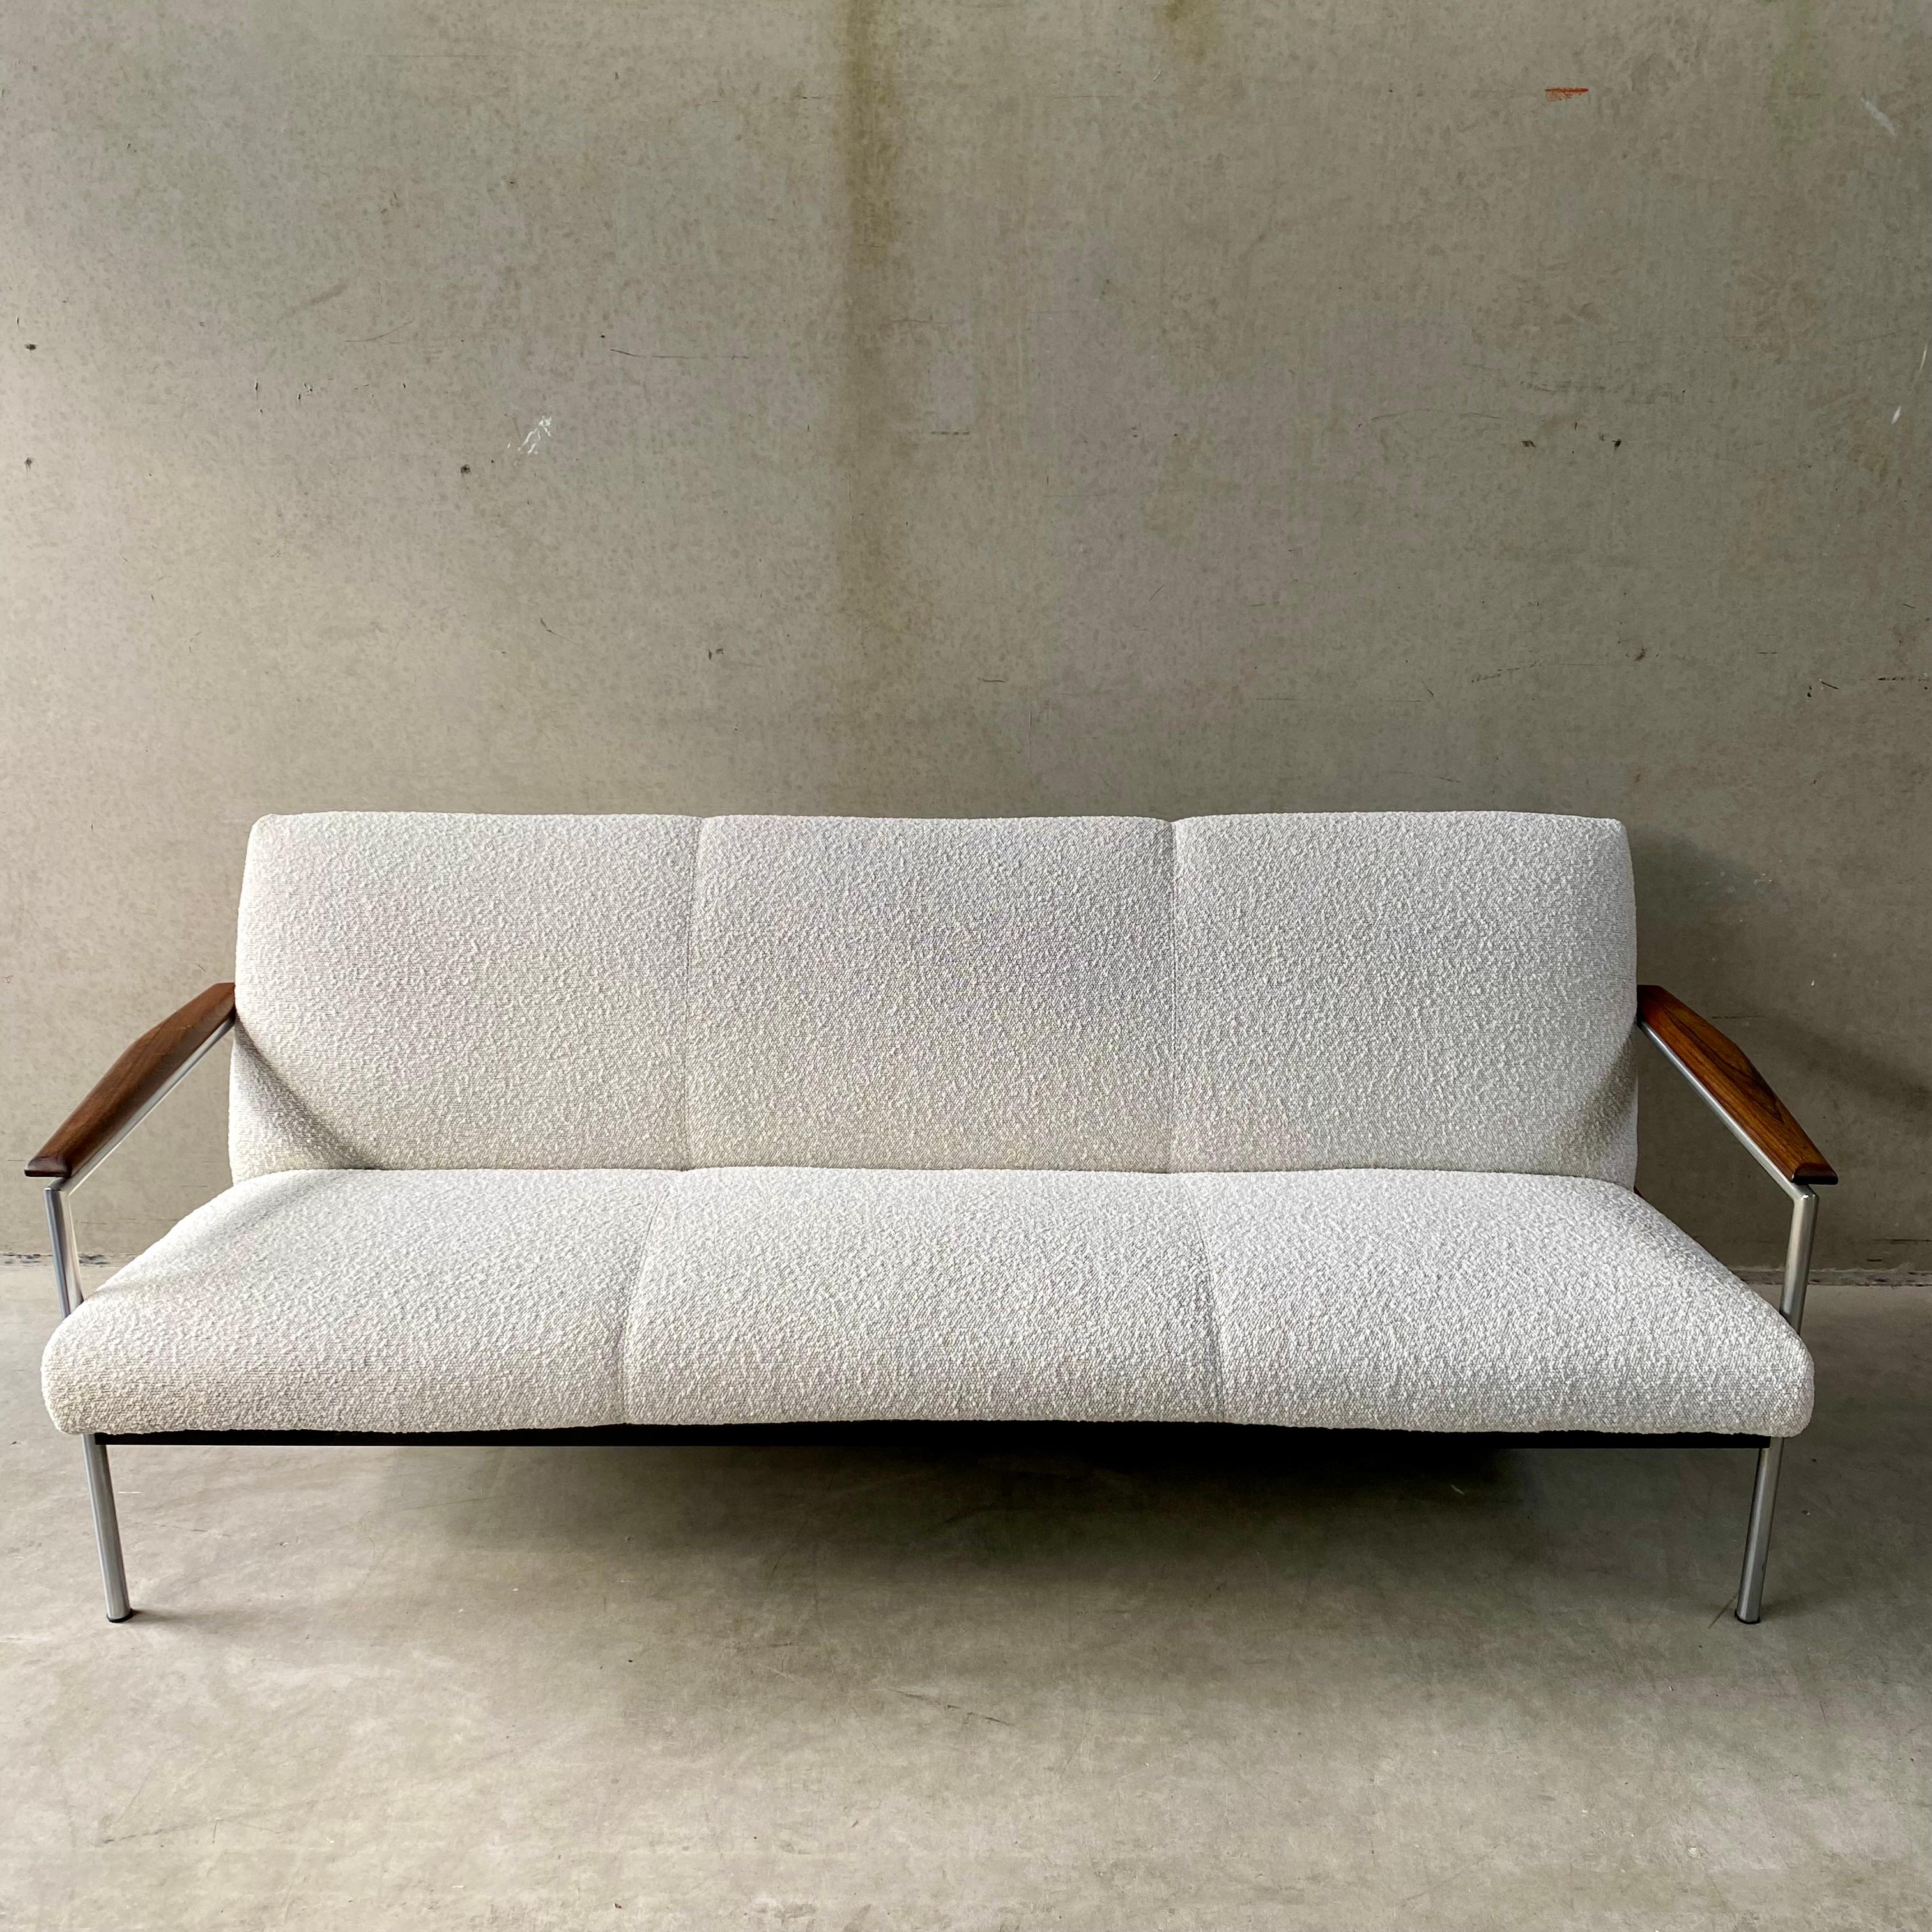 MID-CENTURY 3-SEATER SOFA WITH ITALIAN WALNUT ARMRESTS AND BOUCLÉ FABRIC FOR TOPFORM, NETHERLANDS 1970s

Refurbished TOPFORM 3-seater sofa from the 70s. Spacious and comfortable vintage sofa in boucle fabric and renewed foam. Very comfortable. Some